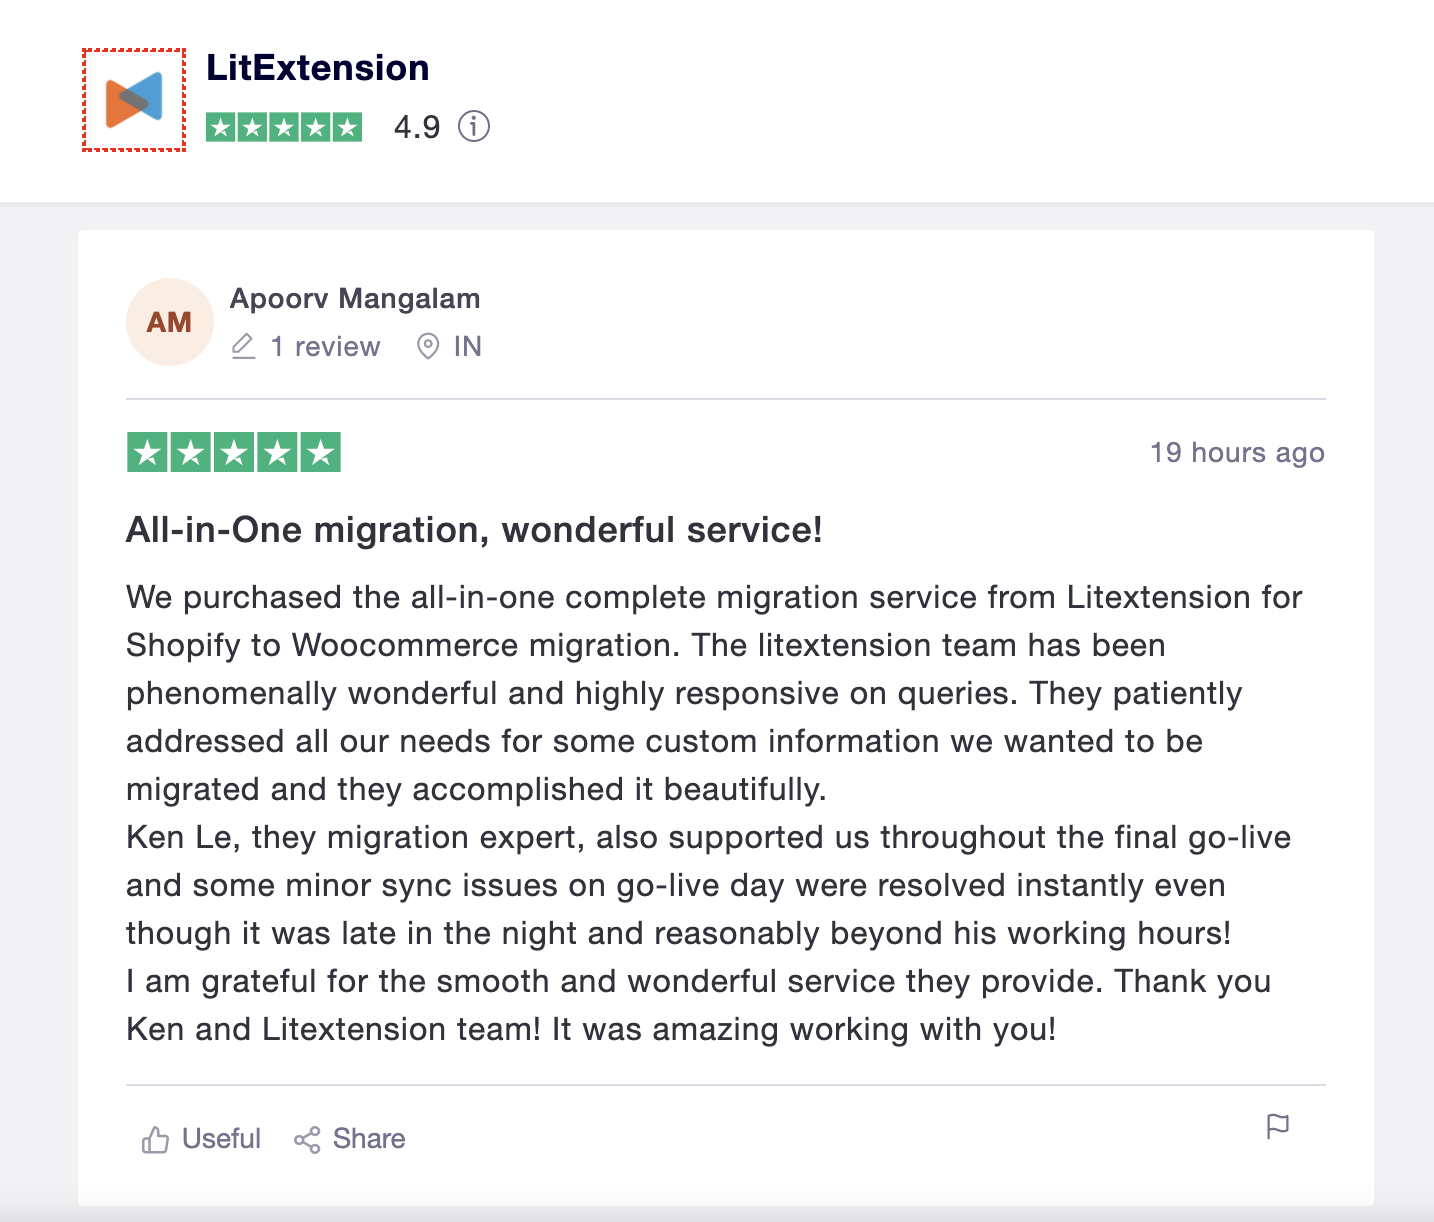 Customer Review